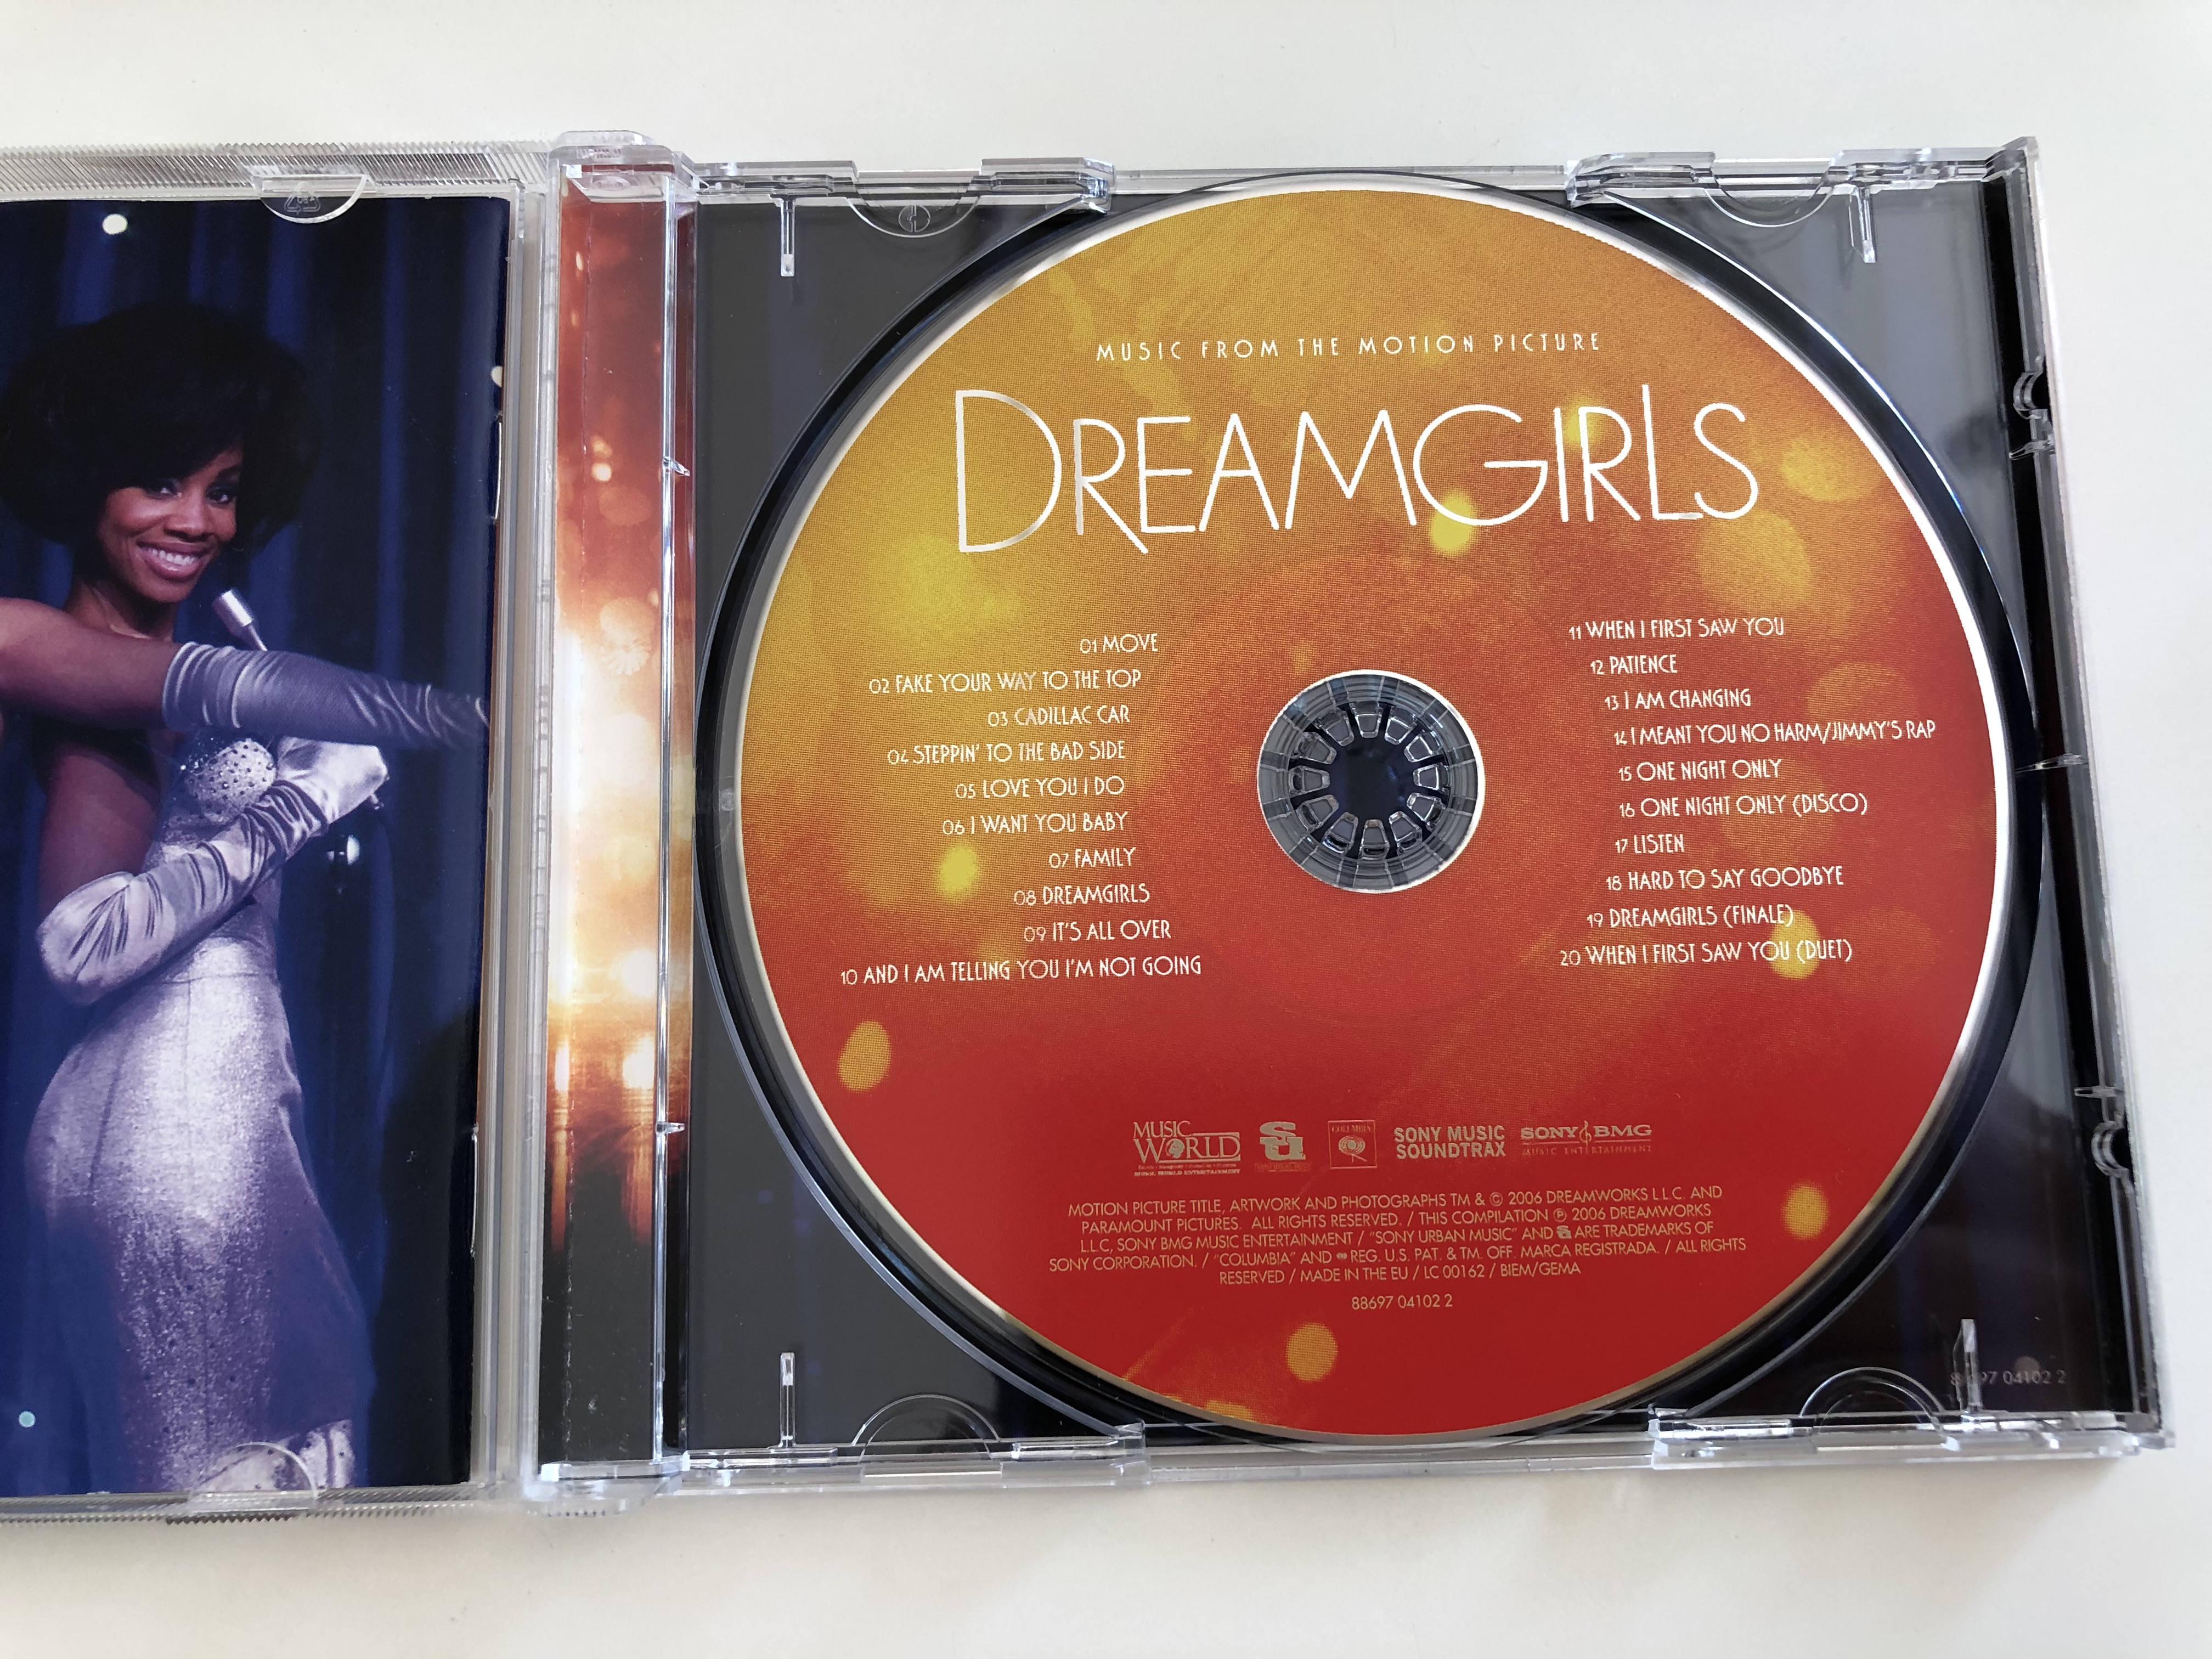 dream-girls-music-from-the-motion-picture-move-love-you-i-do-family-hard-to-say-goodbye-audio-cd-2006-sony-bmg-3-.jpg